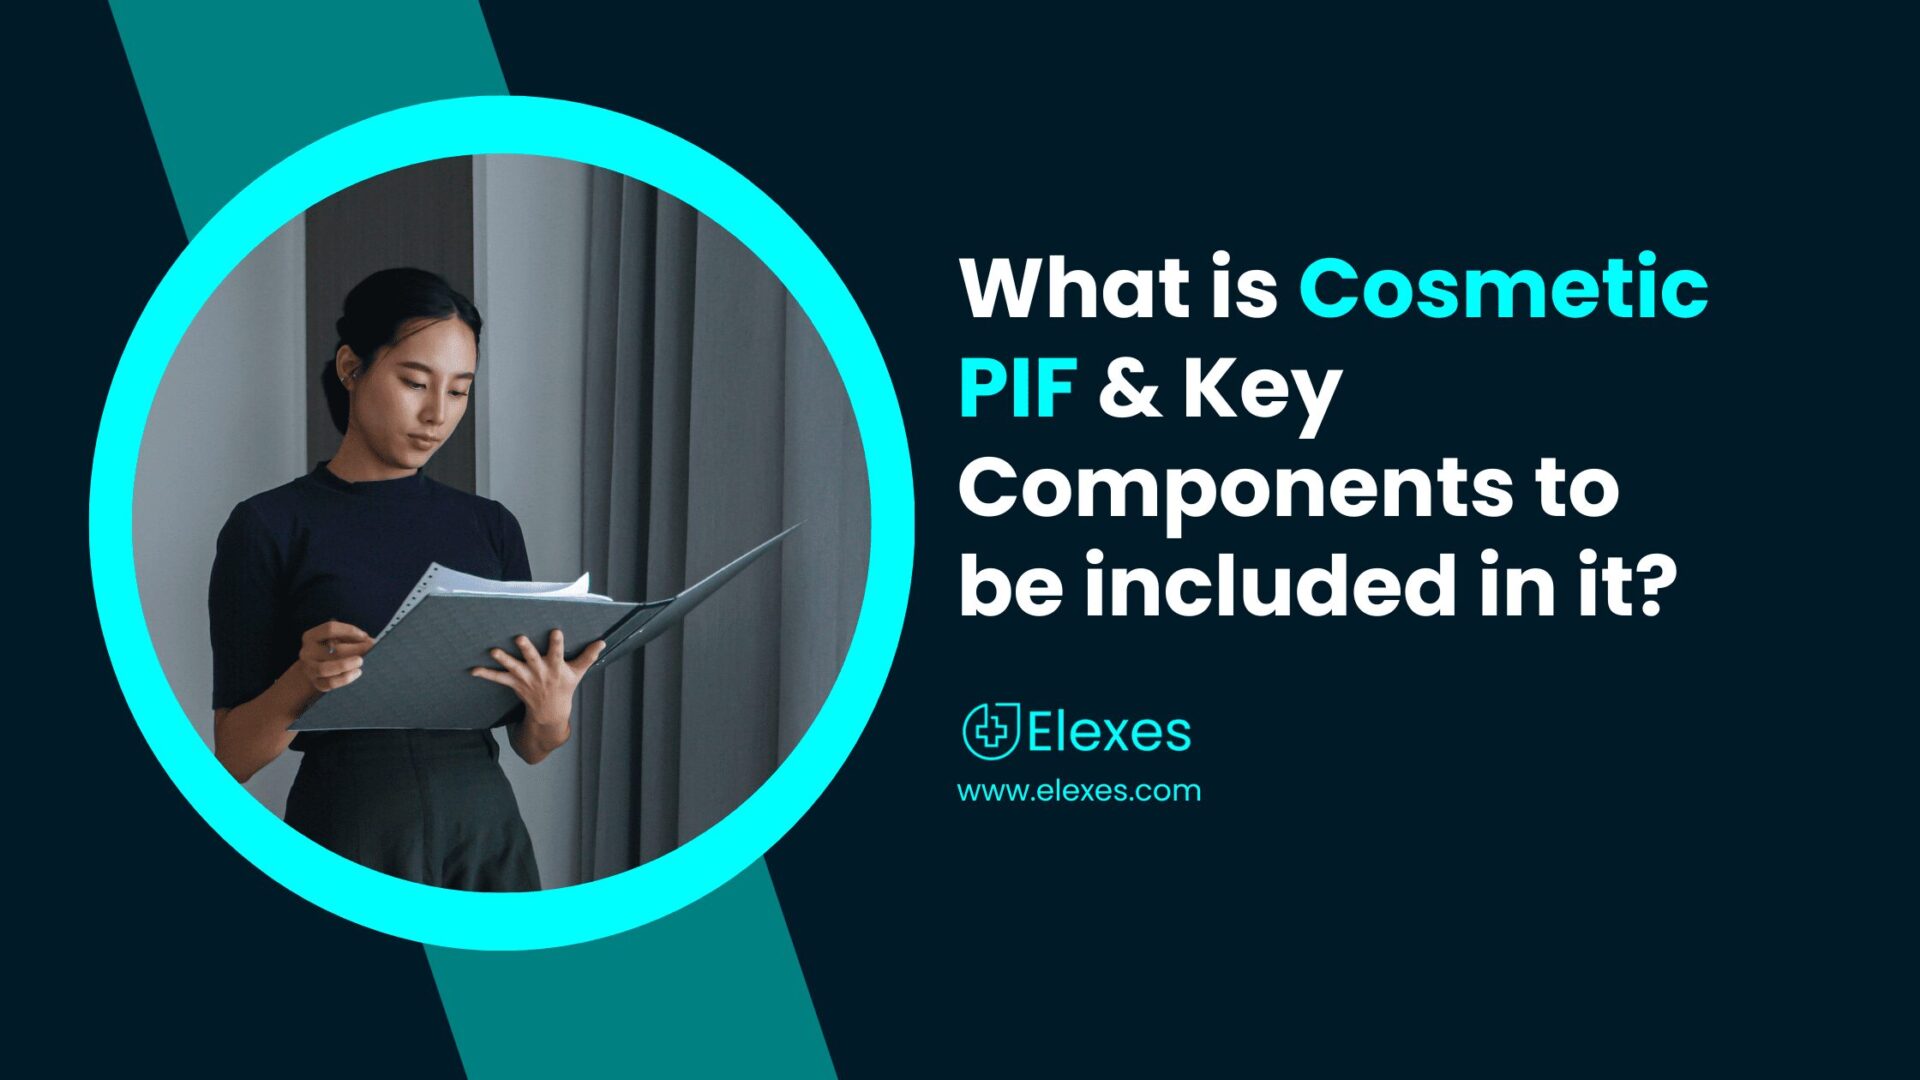 What is Cosmetic PIF & Key Components to be included in it?